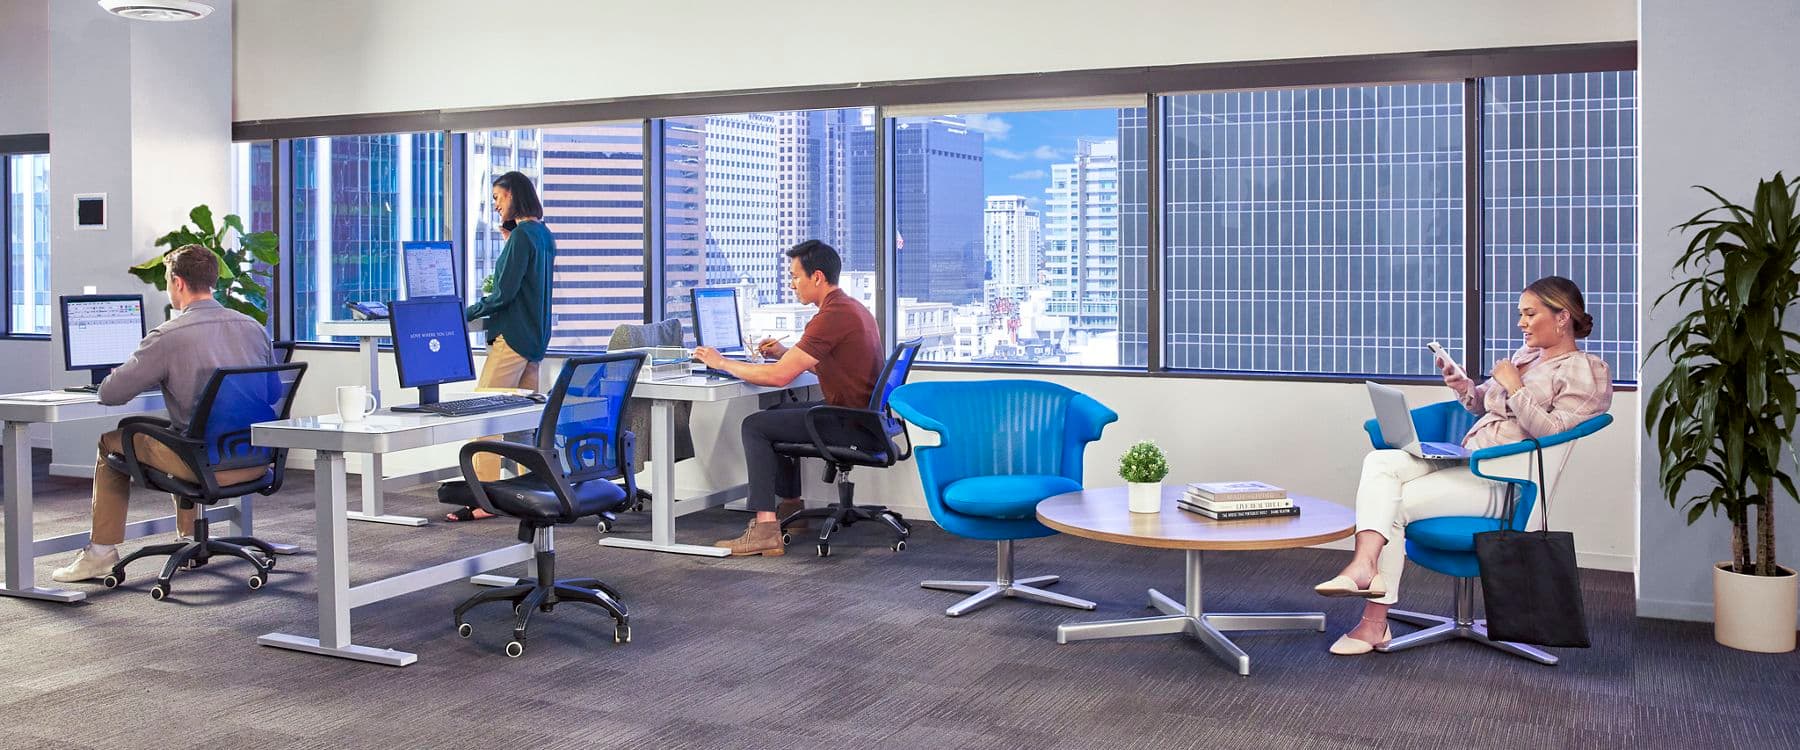 Interior view of Flex Workplace+ Suite 1300 at 101 West Broadway, in San Diego, California.